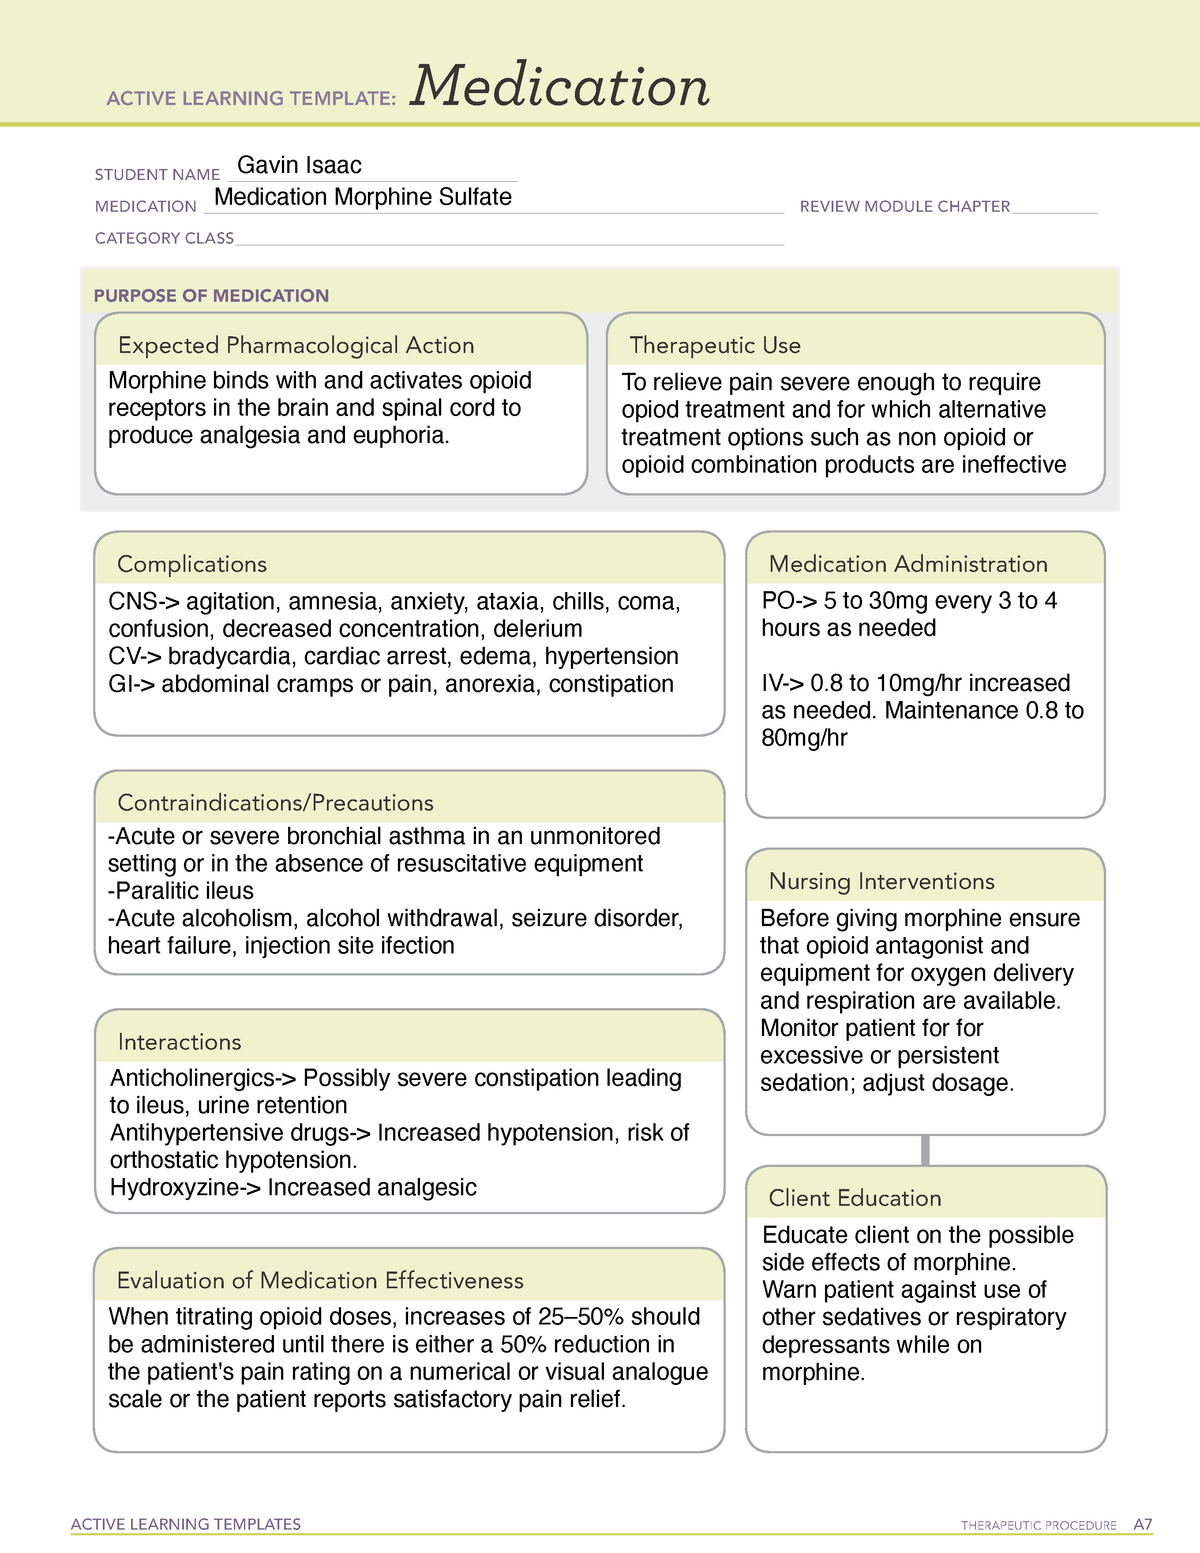 medication-morphine-active-learning-template-active-learning